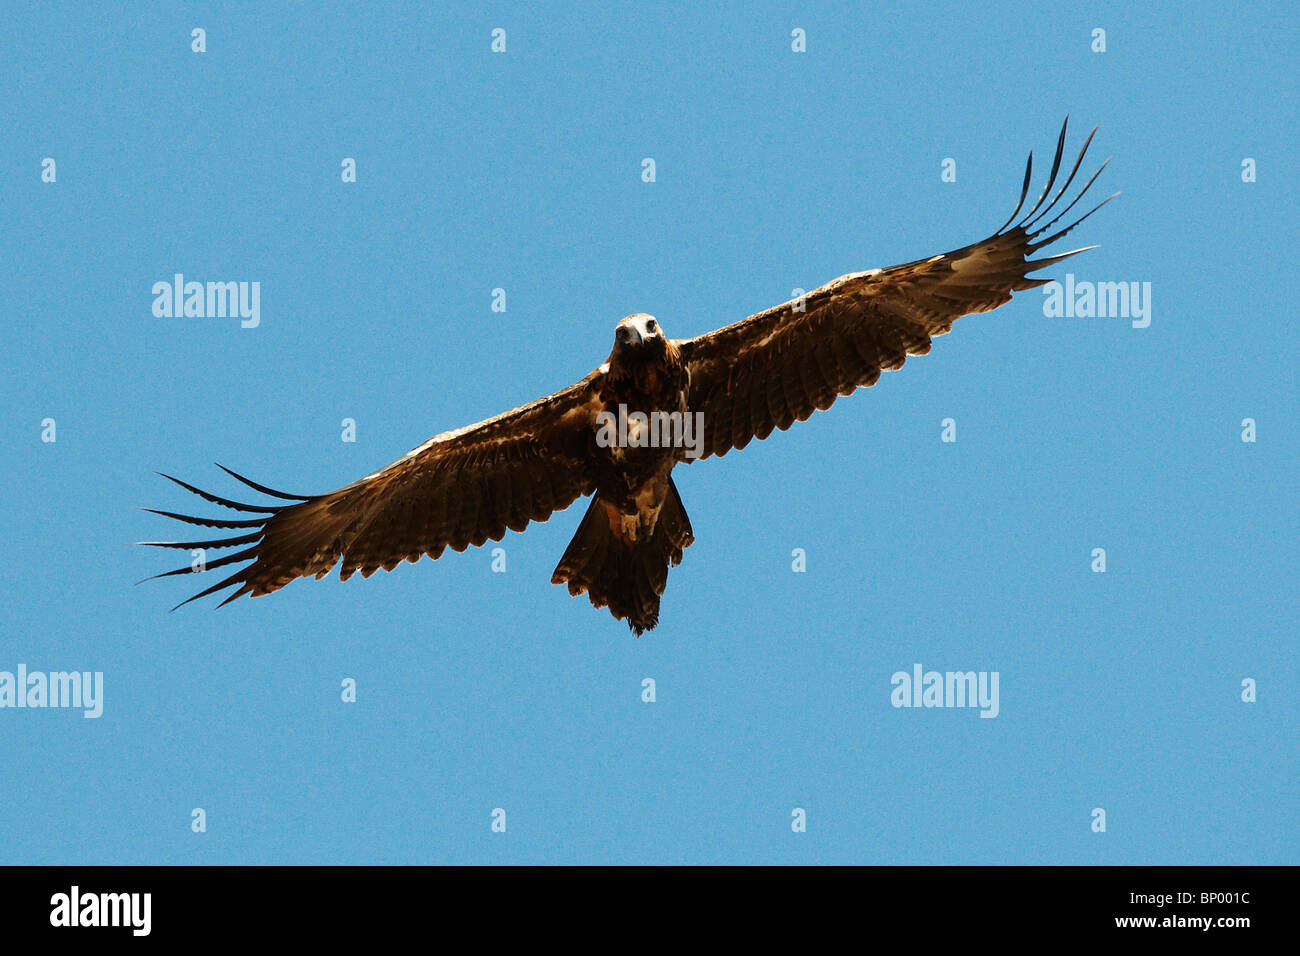 A 2nd Year Juvenile Male Wedge-Tailed Eagle in flight. Stock Photo